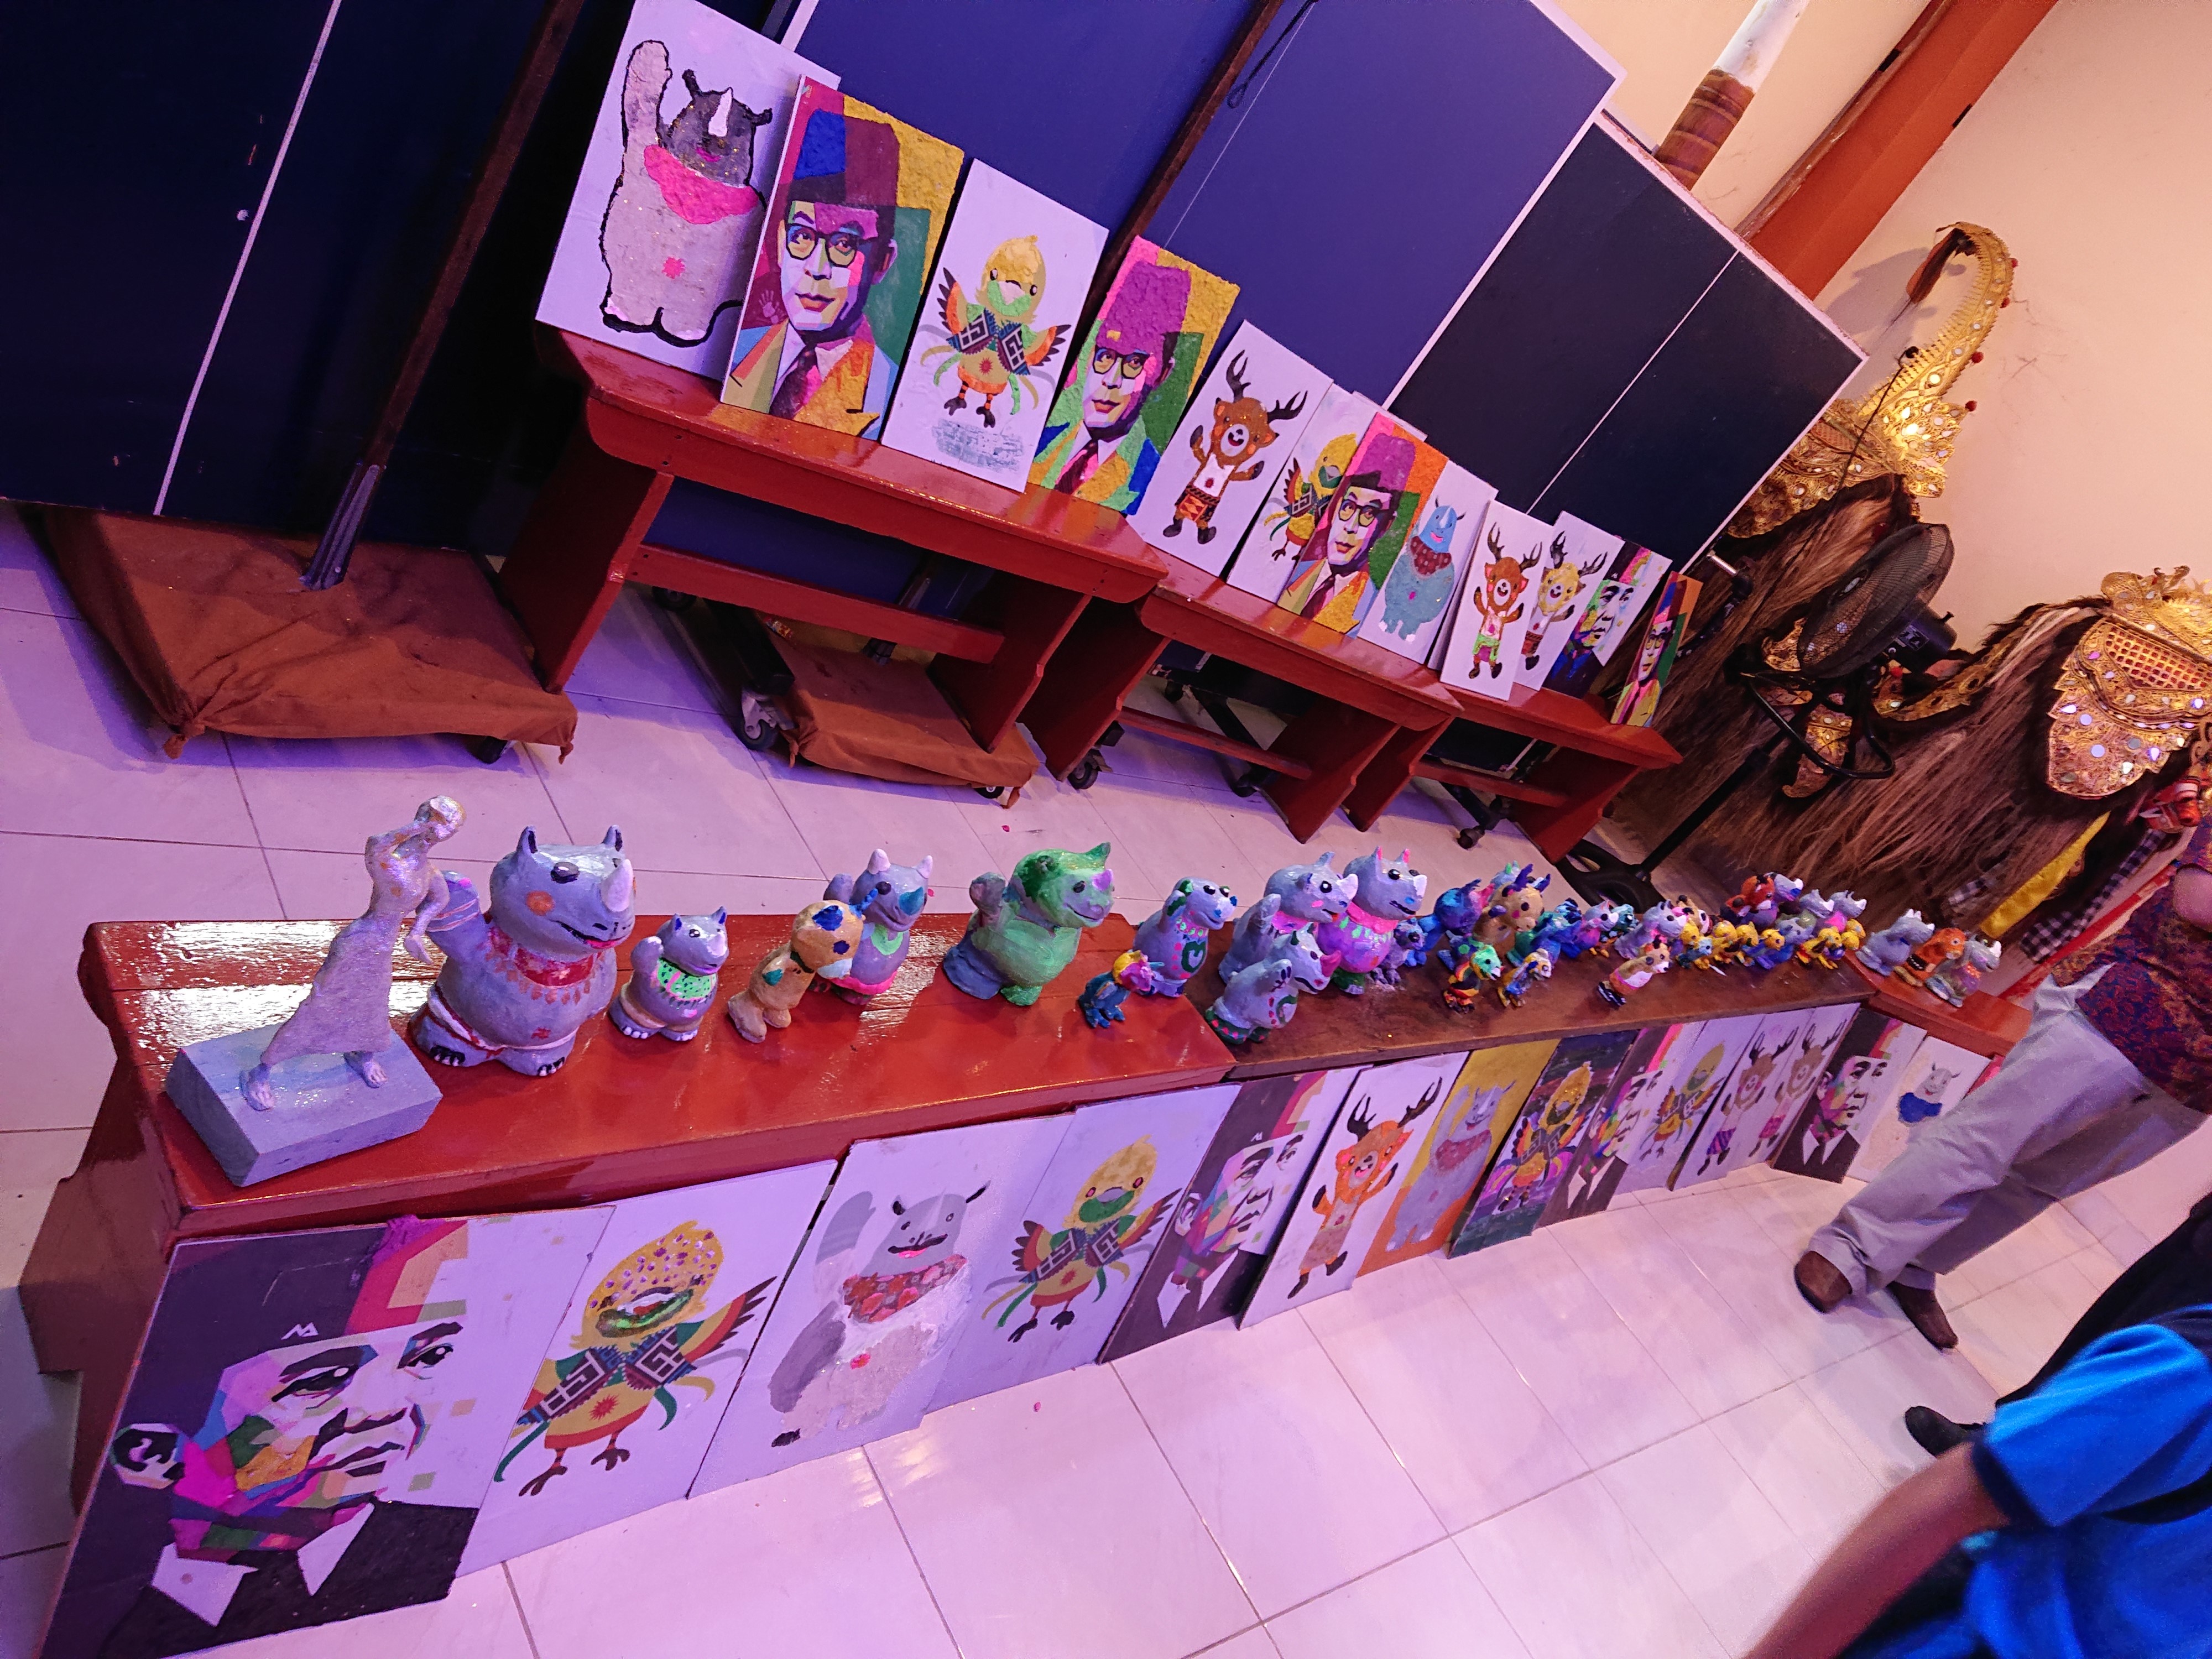 Displayed art pieces from the event